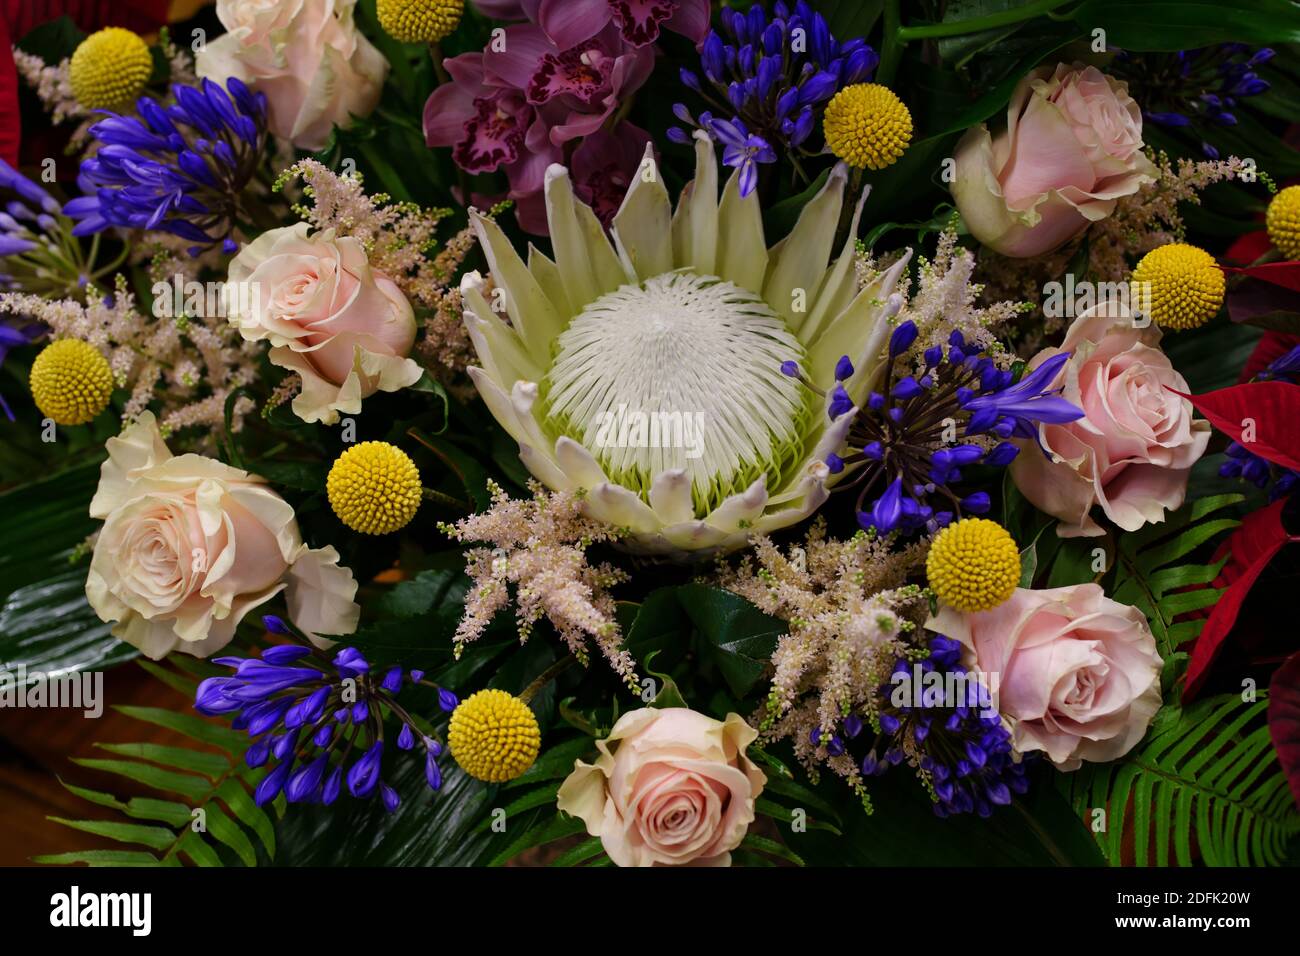 Bouquet of varied flowers from the florist's shop for a wedding or celebration Stock Photo